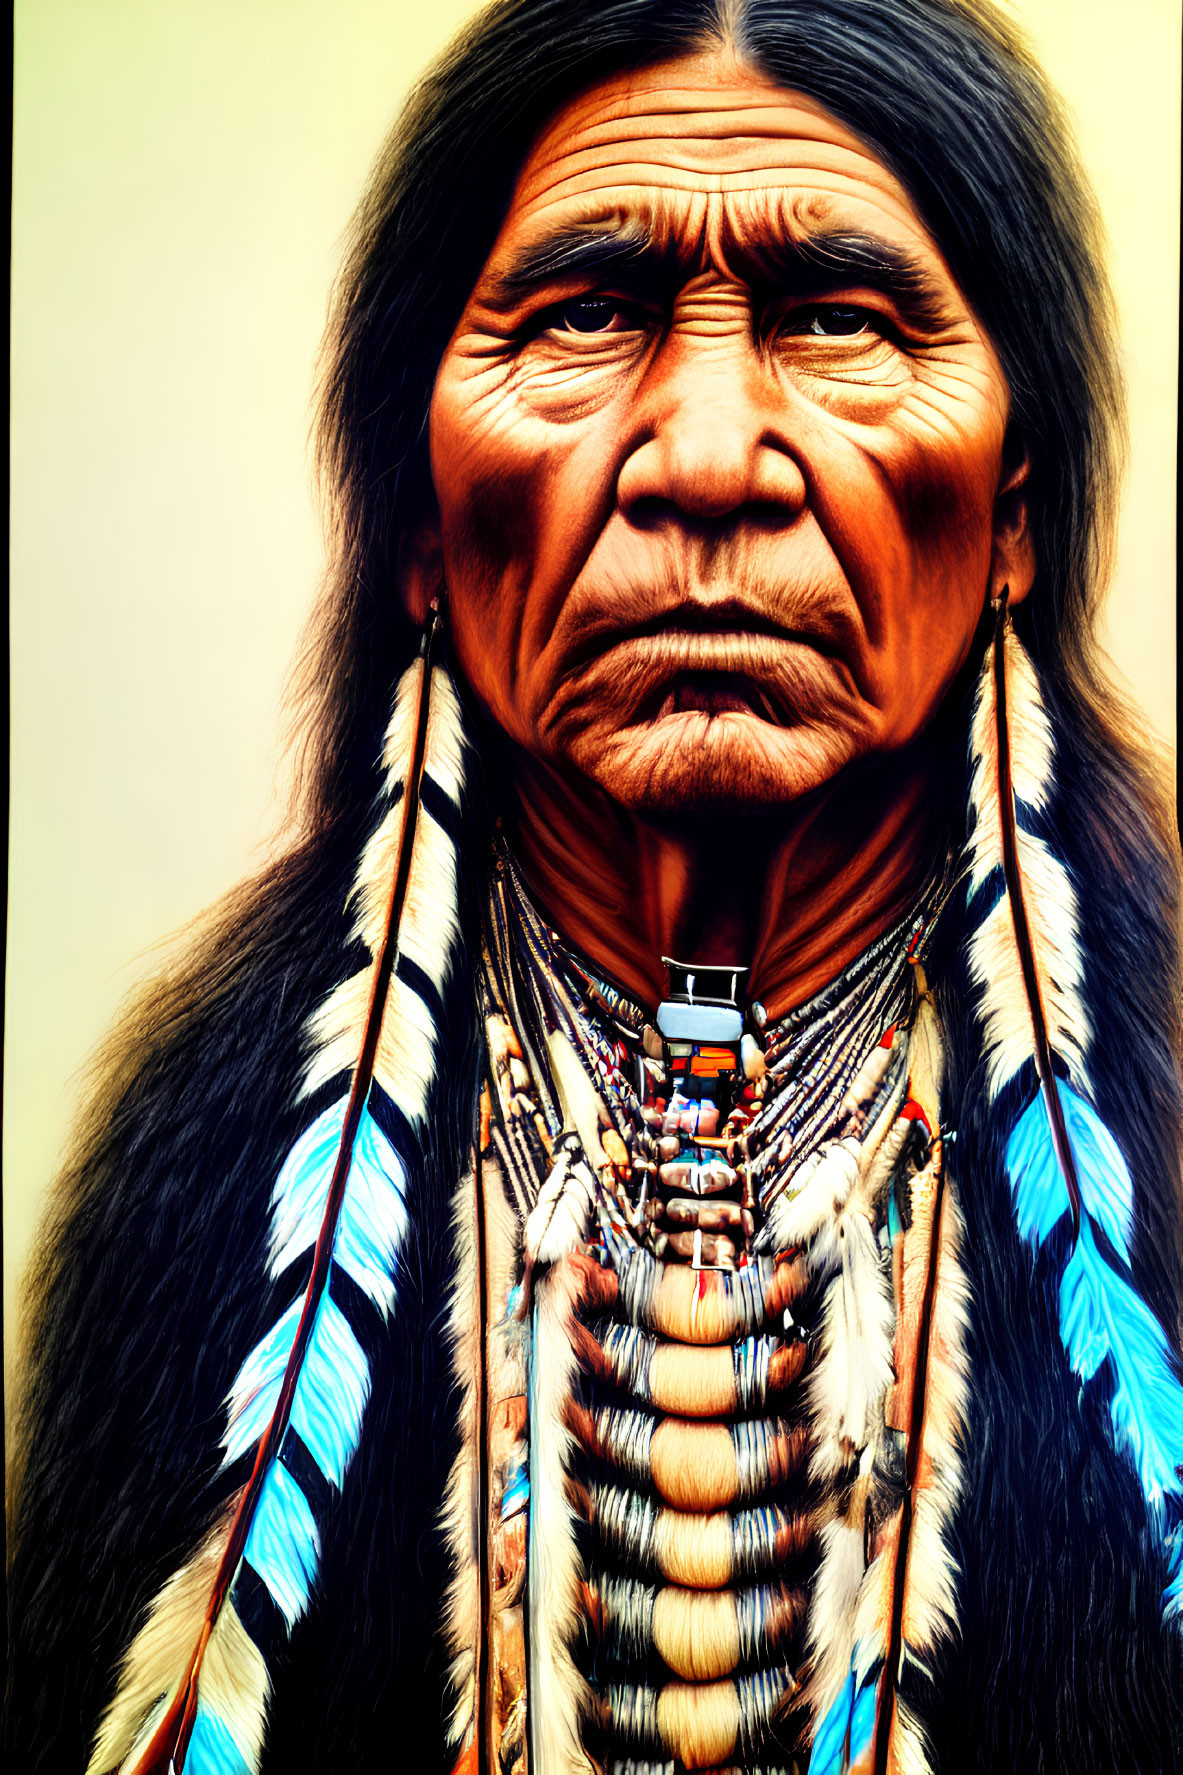 Native American person portrait with long dark hair and traditional attire